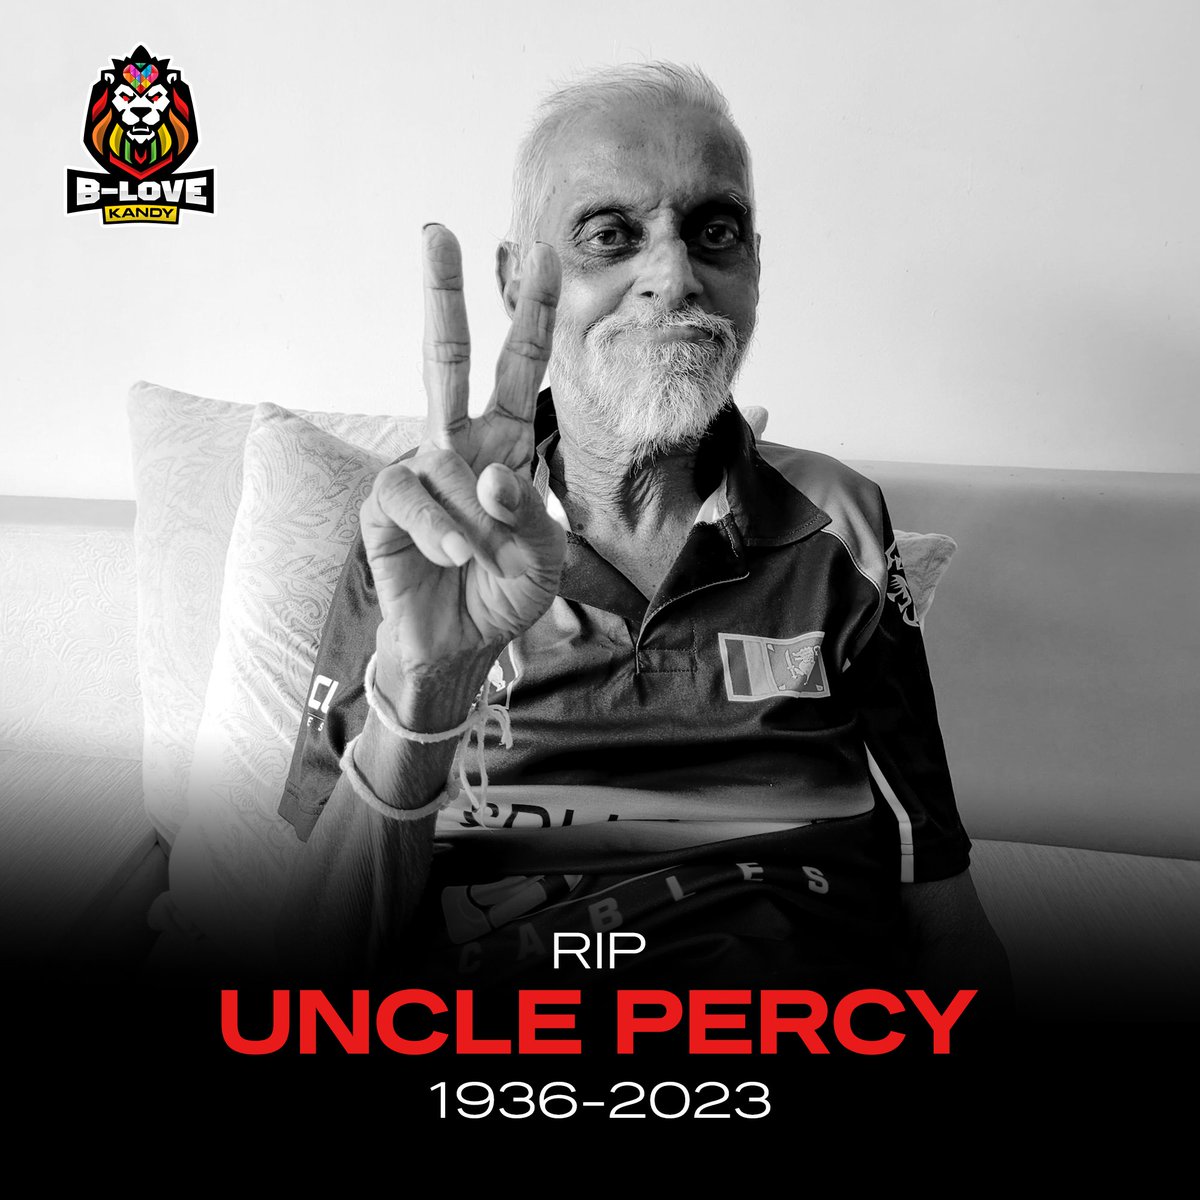 I’m Percy Cricket crazy But I have no mercy For those cricketers, spectators, and administrators Who are lazy ❤️ #BloveKandy #KandyLions #UnclePercy #RIP